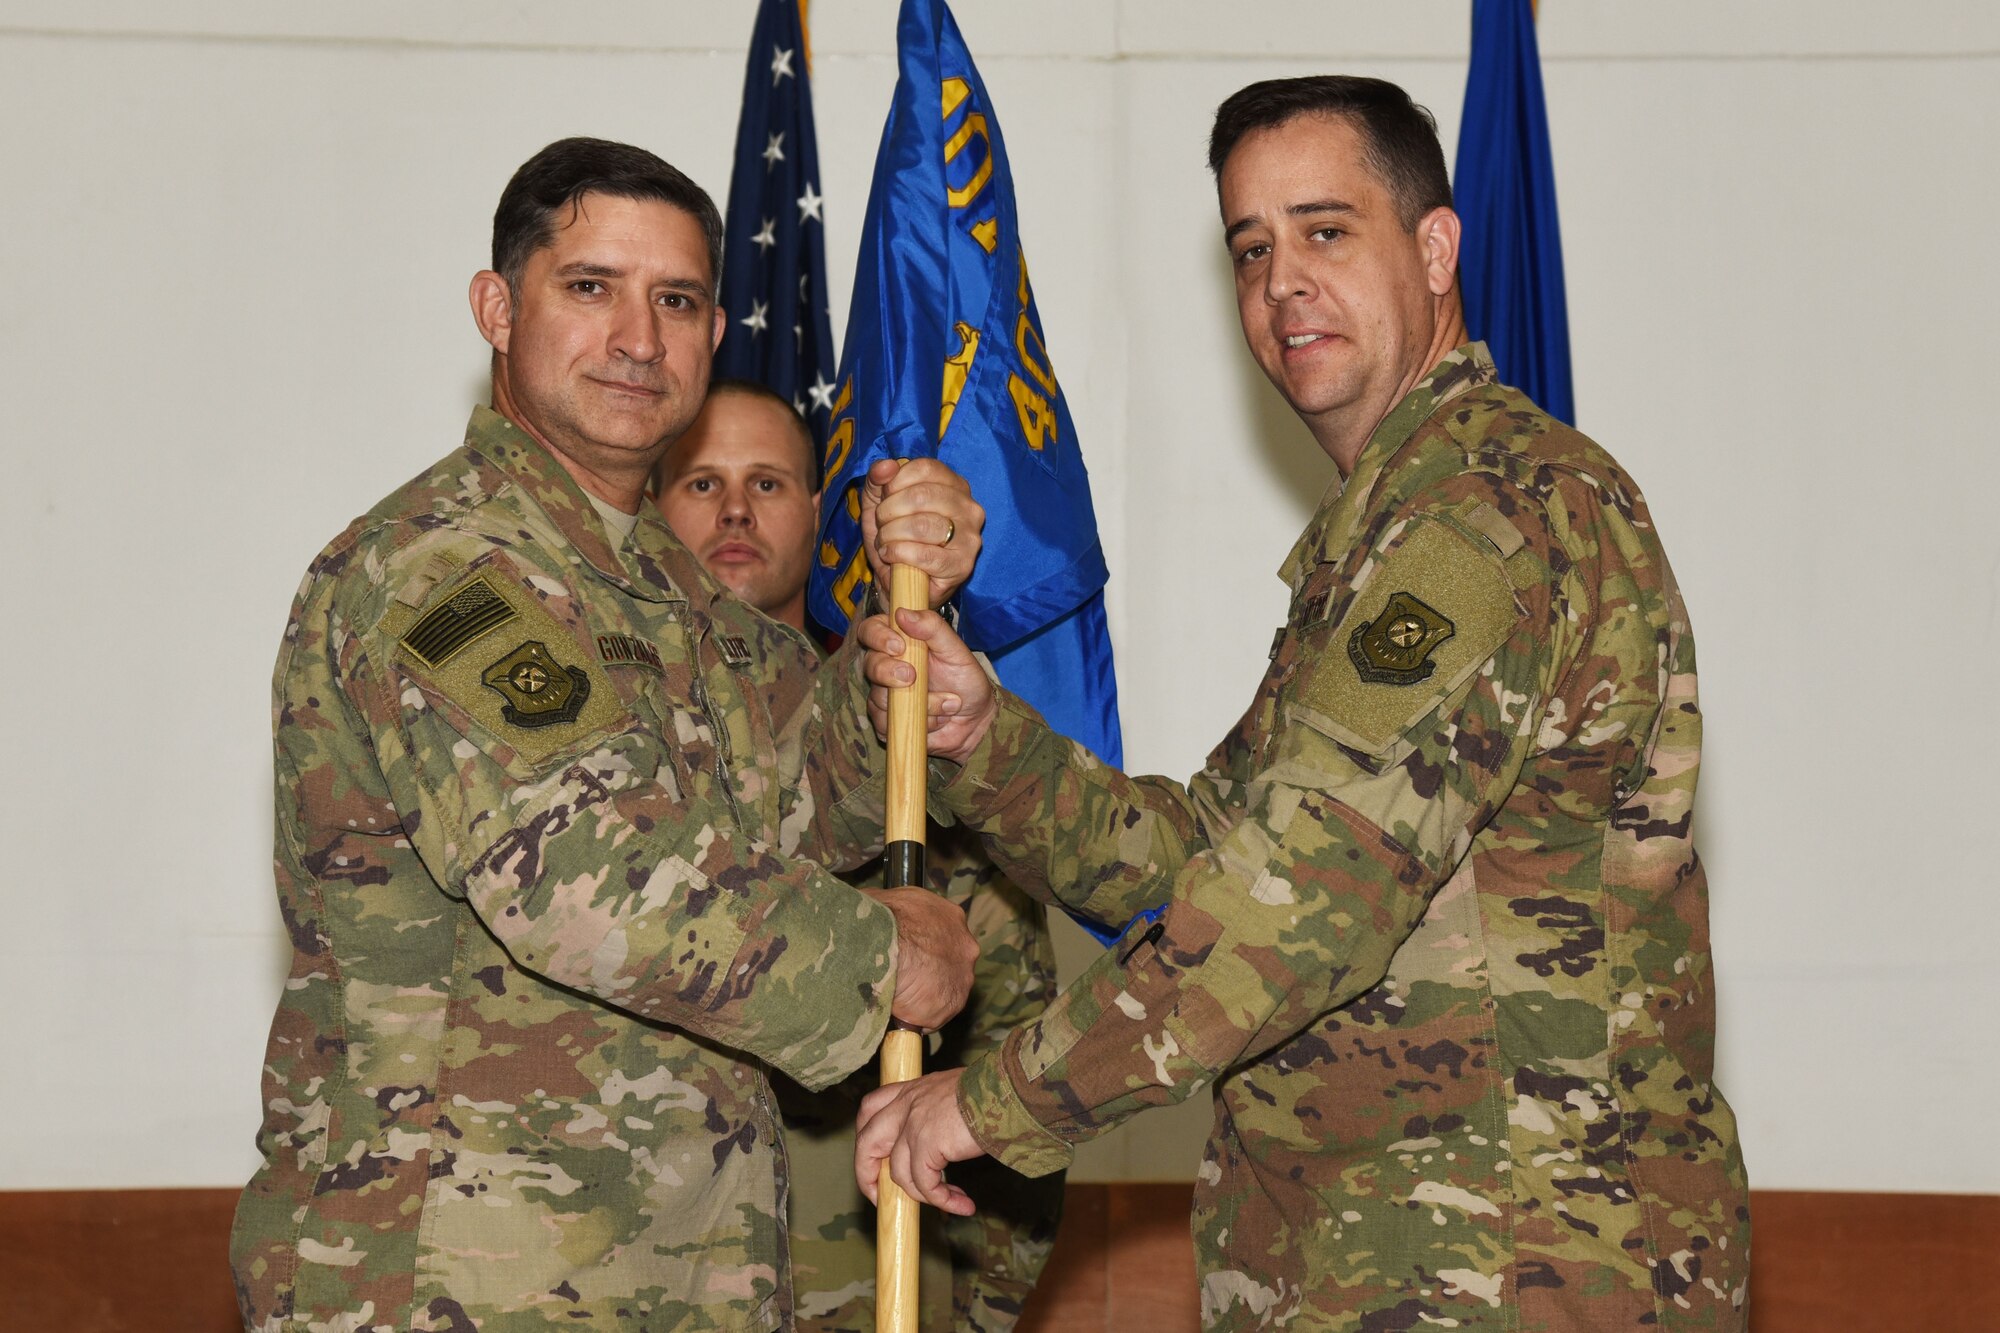 U.S. Air Force Col. John Gonzales, 407th Air Expeditionary Group Commander, passes a guidon to Lt. Col. Glenn Cameron, 407th Expeditionary Civil Engineer Squadron Commander, in Southwest Asia, January 25, 2018. The change of command ceremony is a time honored military tradition that signifies the orderly transfer of authority. (U.S. Air Force photo by Staff Sgt. Joshua Edwards/Released)